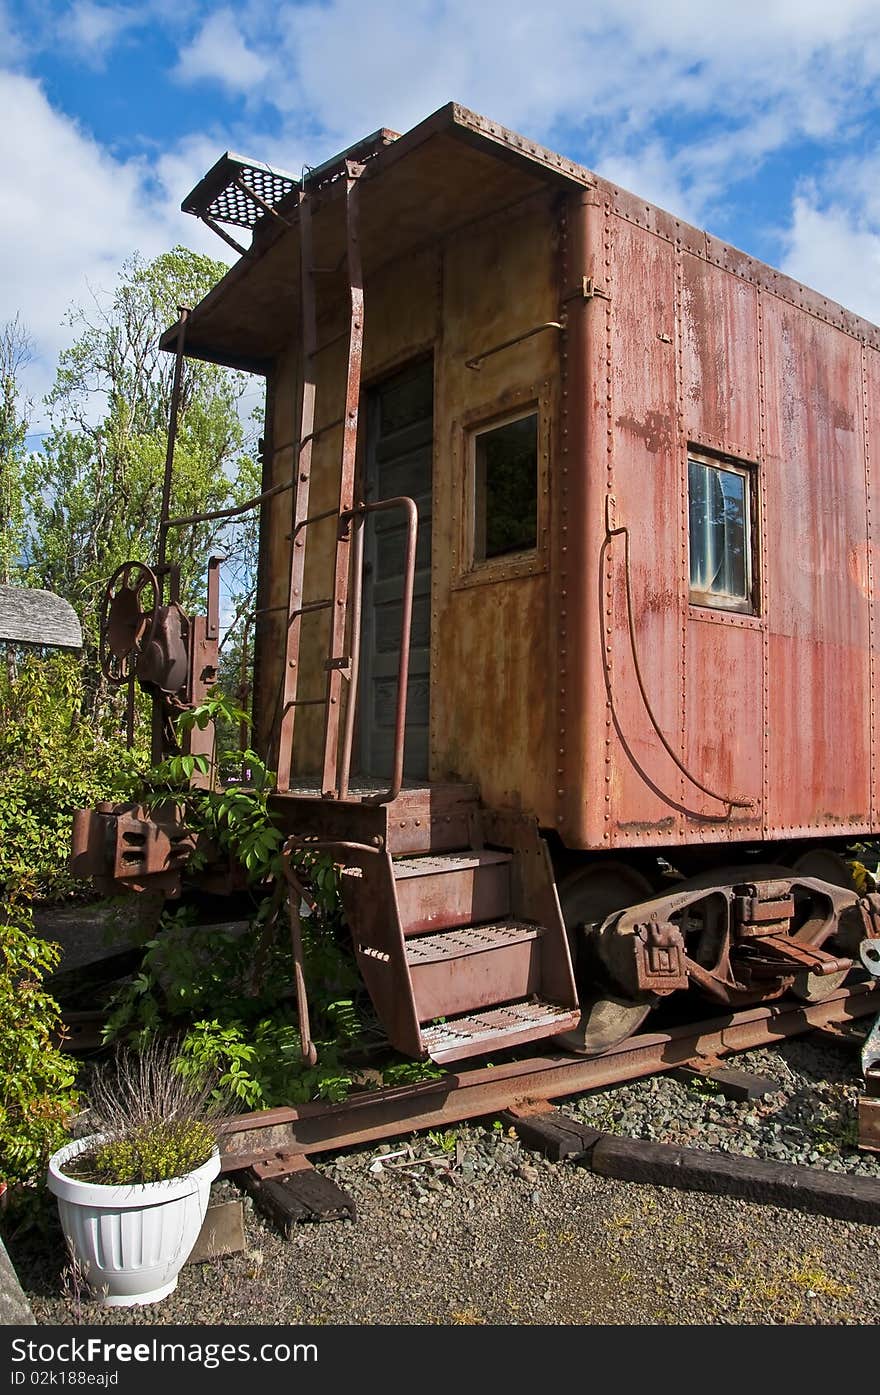 An old red caboose converted into a home